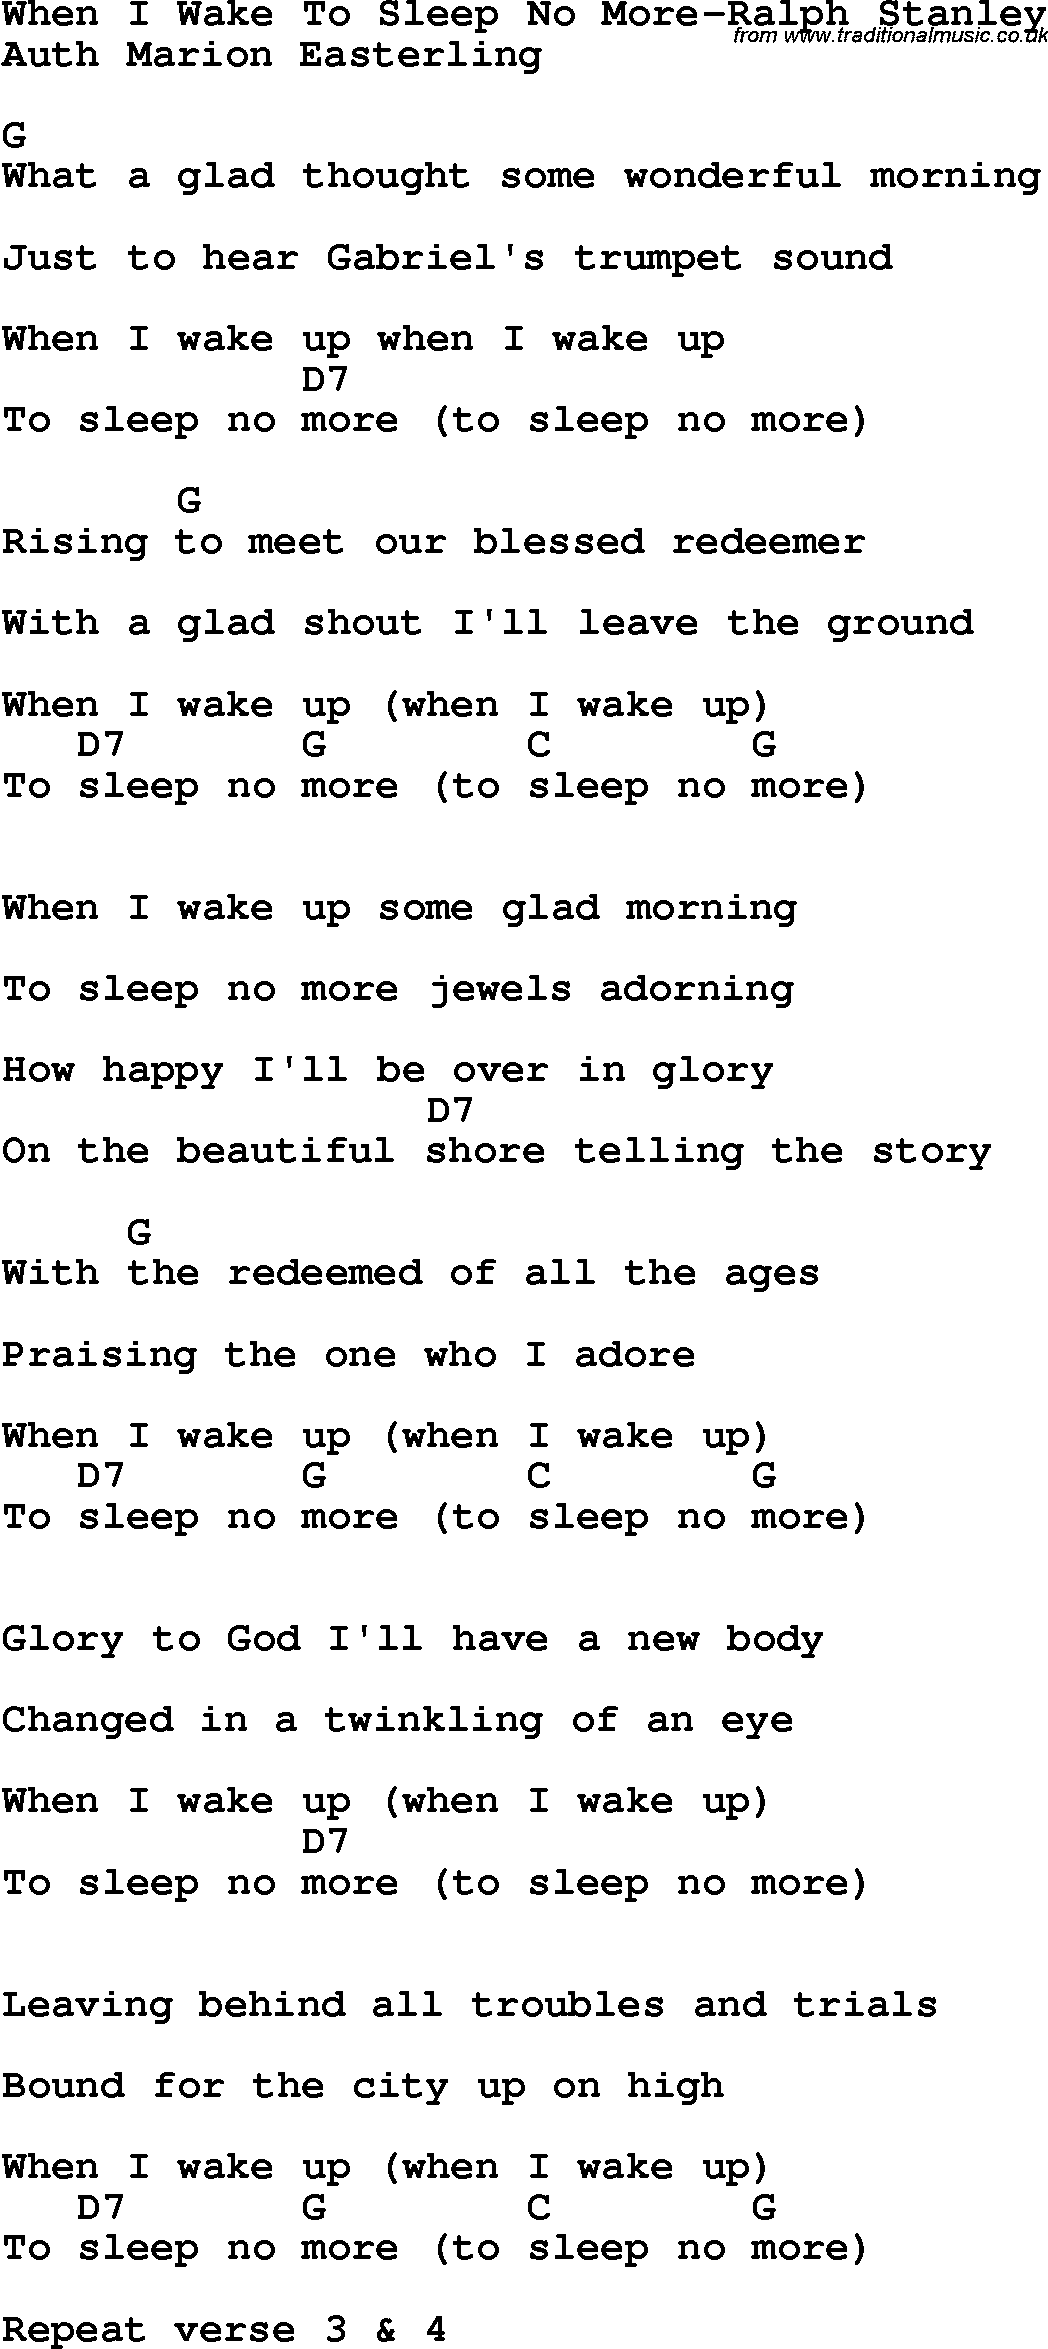 Country, Southern and Bluegrass Gospel Song When I Wake To Sleep No More-Ralph Stanley lyrics and chords